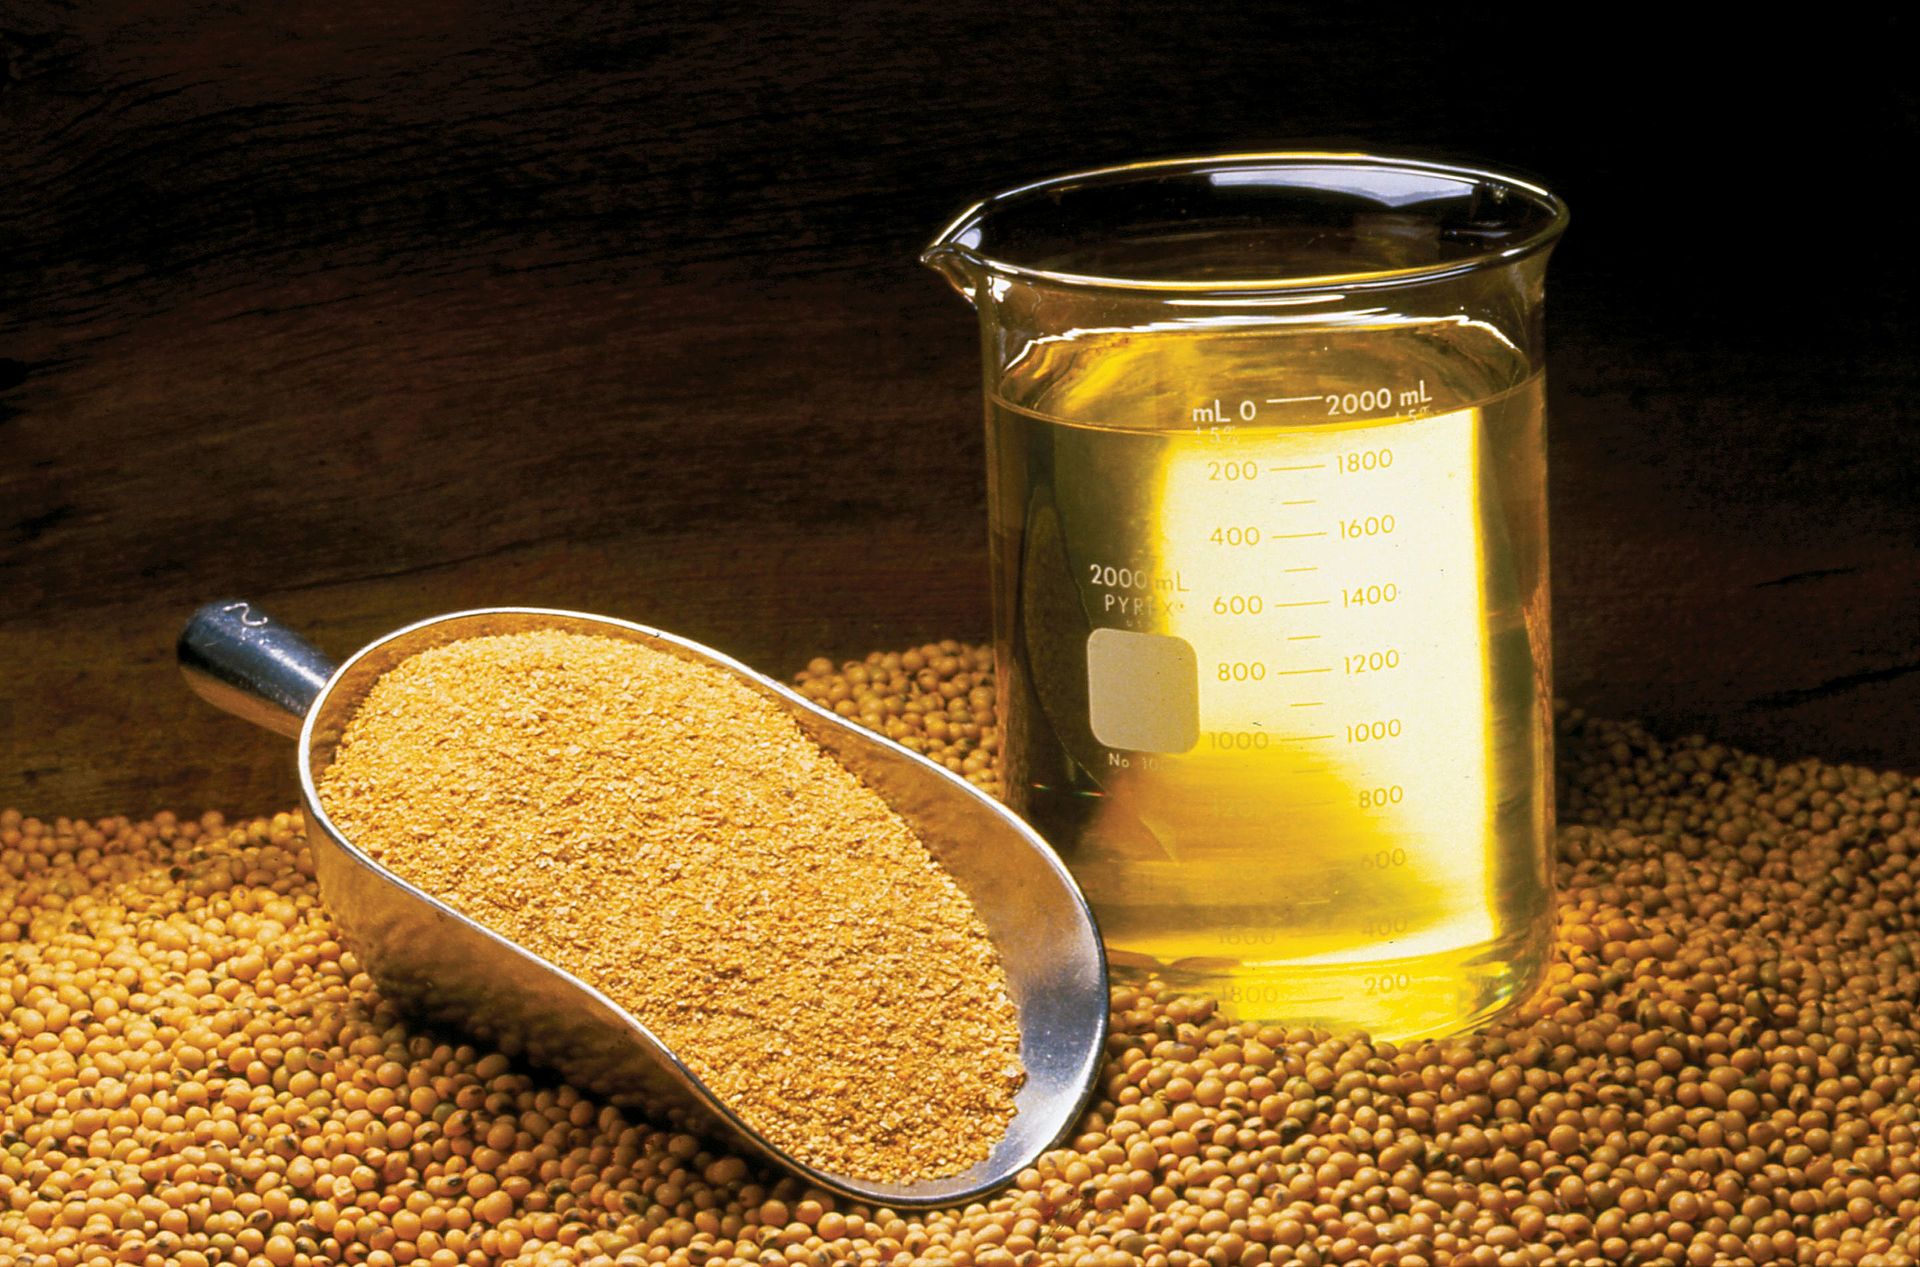 Soybean oil production residue can be used to make a product that treats symptoms of menopause